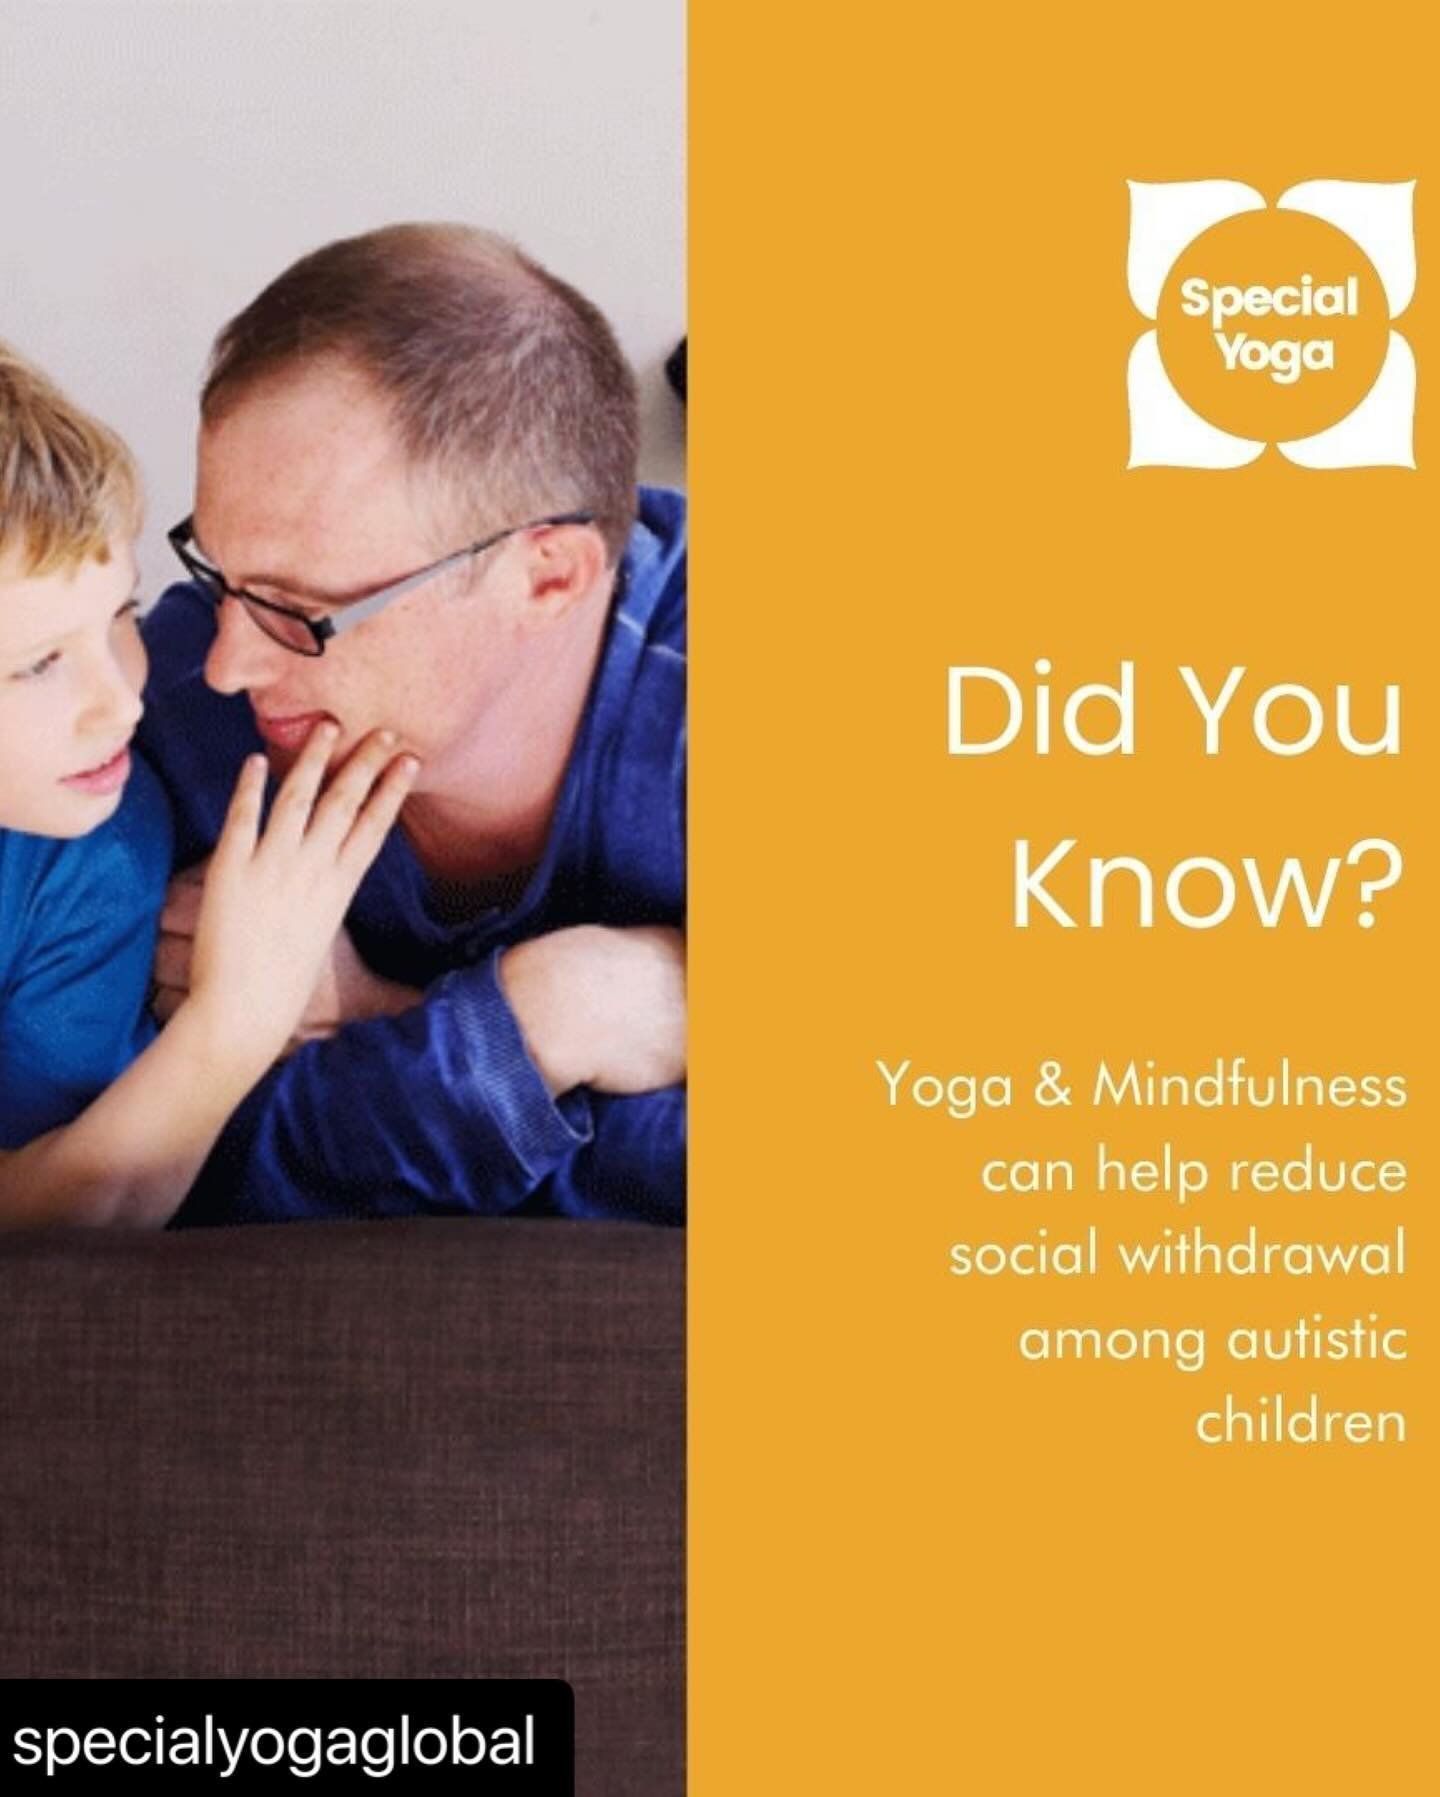 A study published in Behavioral Sciences explored how an 8-week yoga programme affected problem behaviours and motor coordination among children with autism. The results indicate significant reductions in irritability  and social withdrawal, and impr